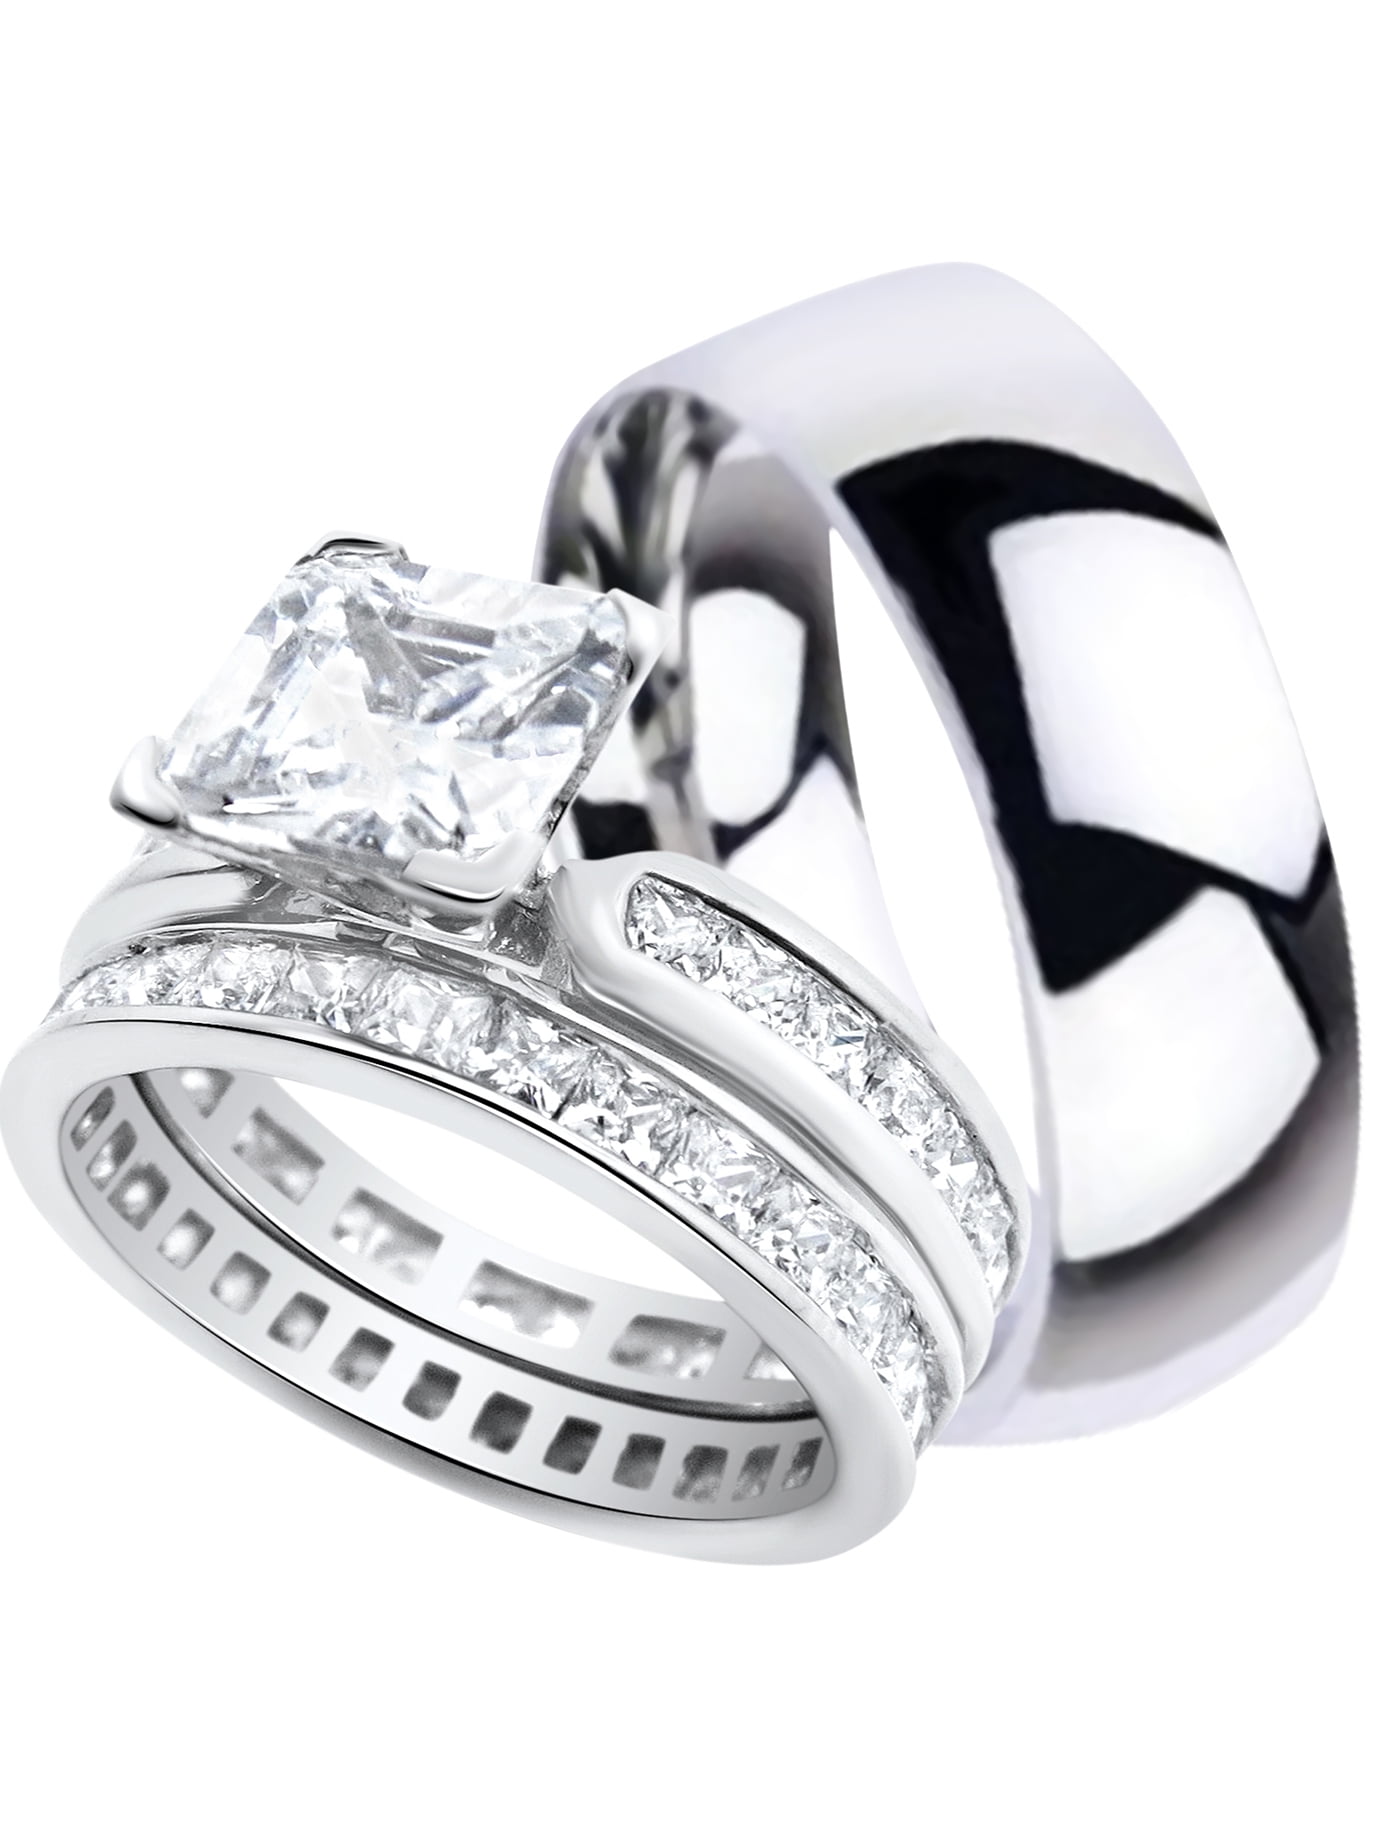 LaRaso Co His and Hers Wedding  Ring  Sets Matching 